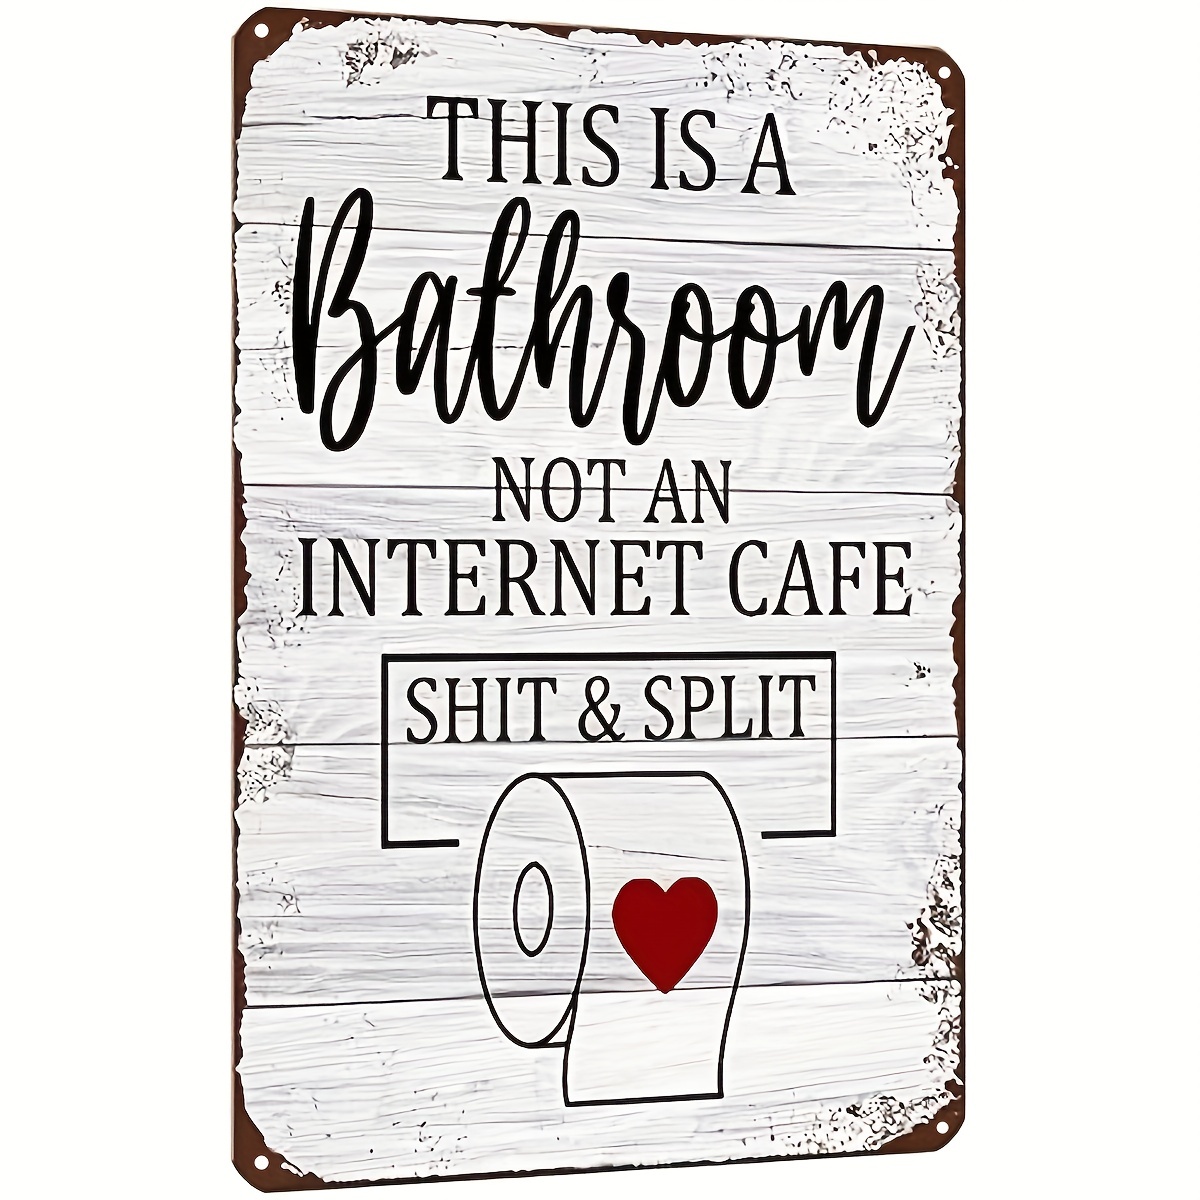 

1pc Funny Sarcastic Metal Tin Sign Bathroom Decor Wall Decor Signs This Is Bathroom Not An Internet 12x8 Inch